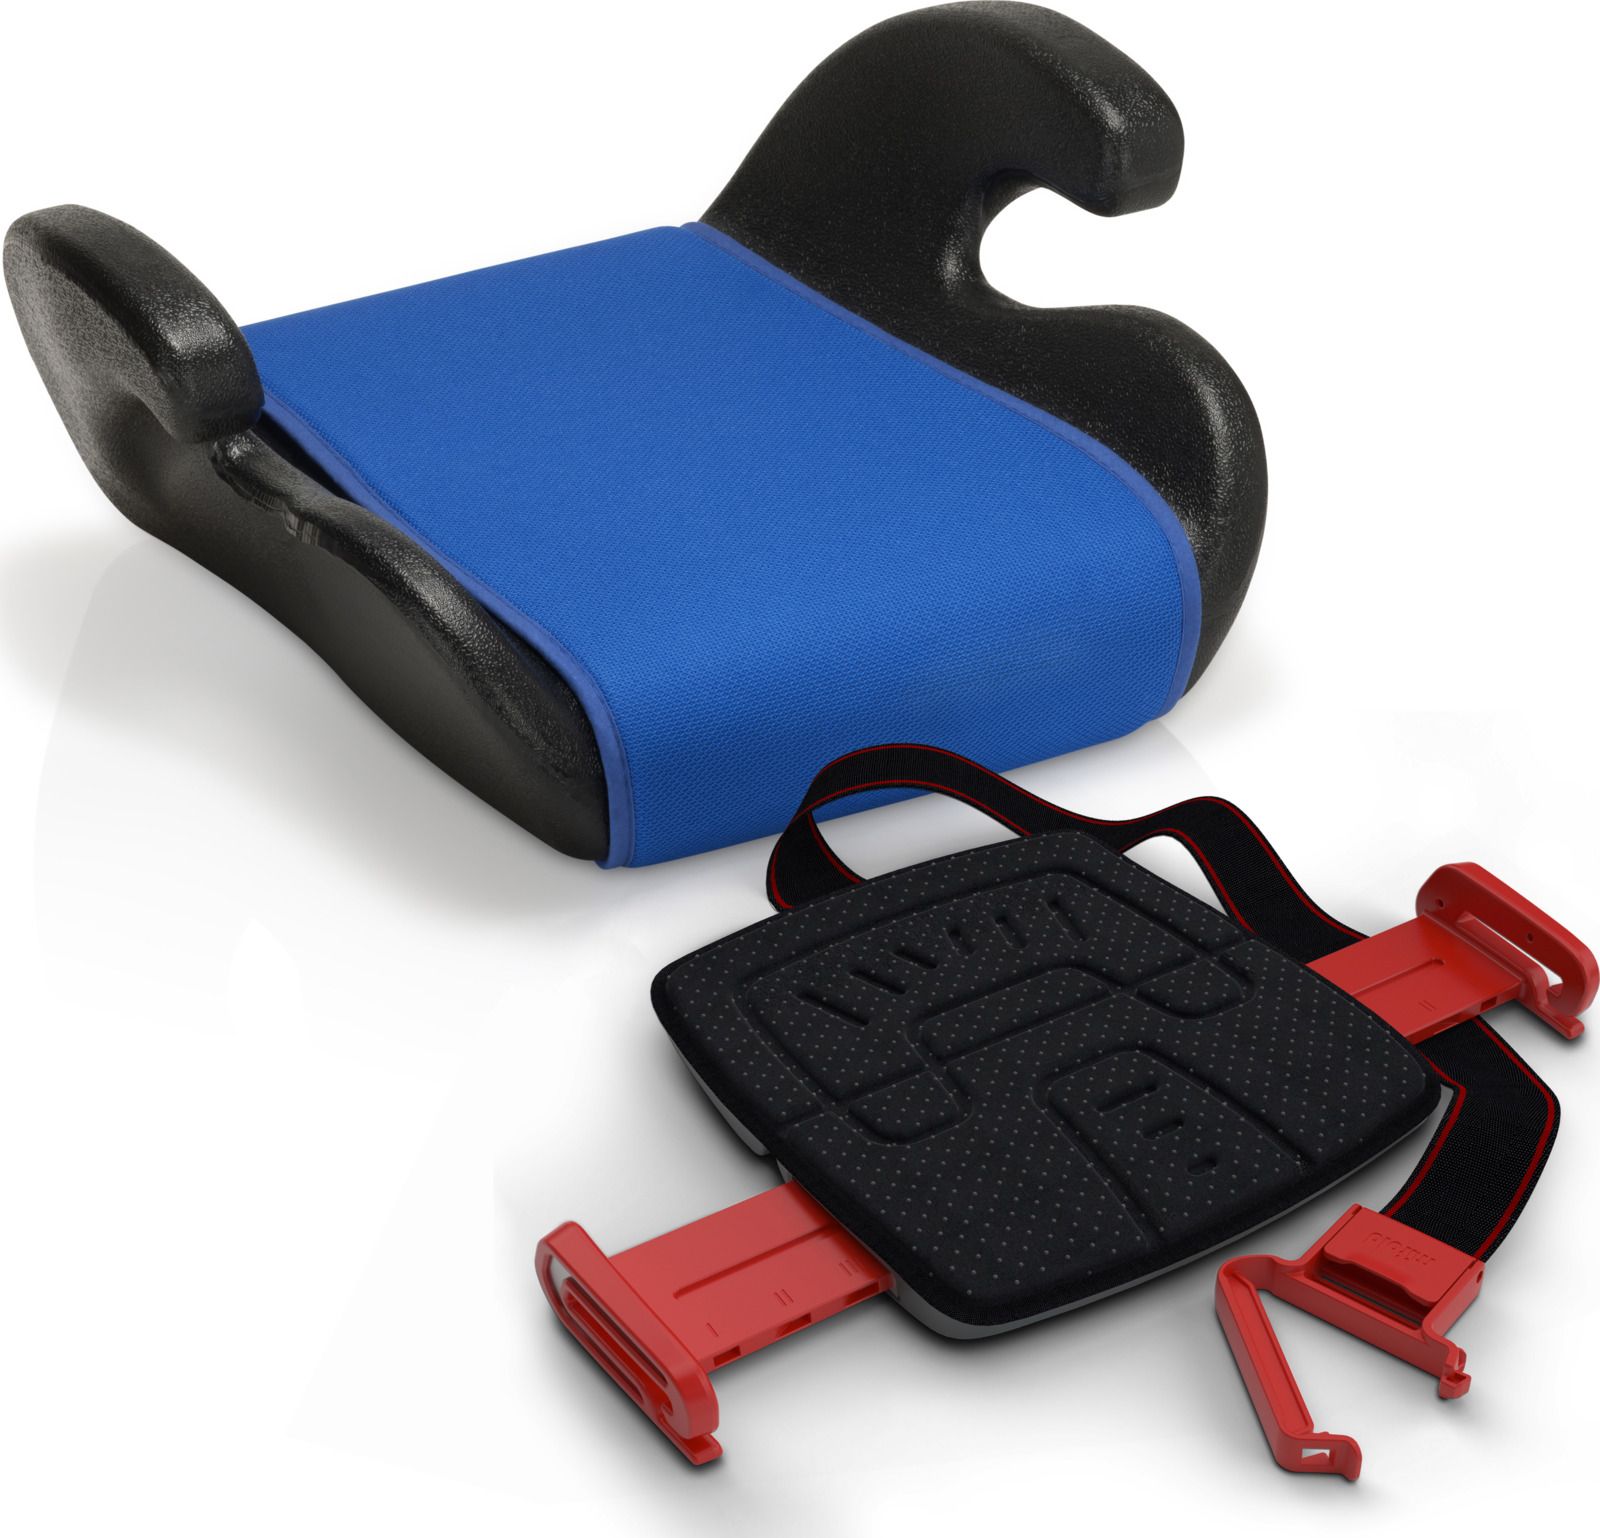   Mifold Grab-and-Go Booster Seat, Slate Grey